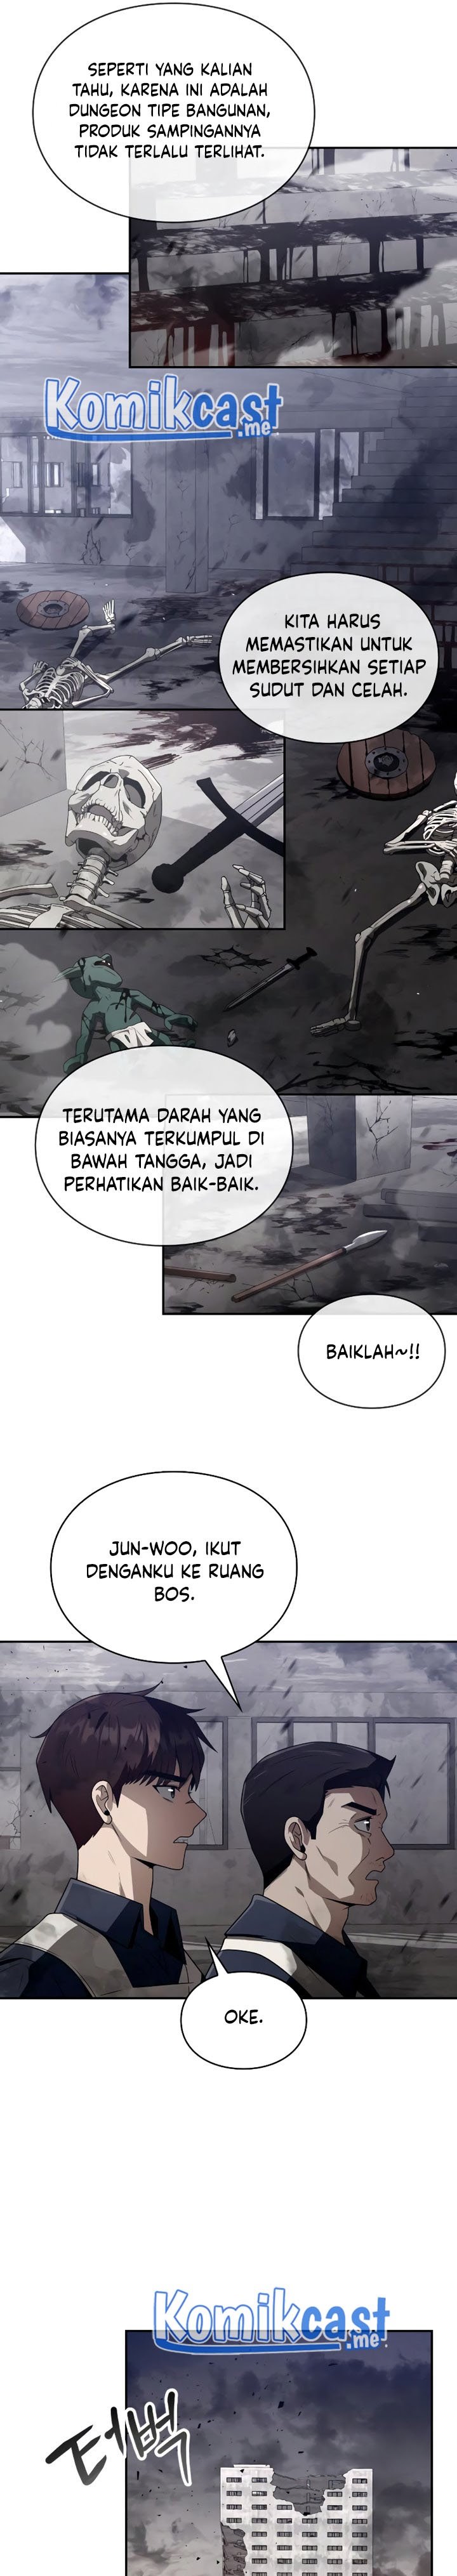 Dilarang COPAS - situs resmi www.mangacanblog.com - Komik clever cleaning life of the returned genius hunter 005 - chapter 5 6 Indonesia clever cleaning life of the returned genius hunter 005 - chapter 5 Terbaru 31|Baca Manga Komik Indonesia|Mangacan